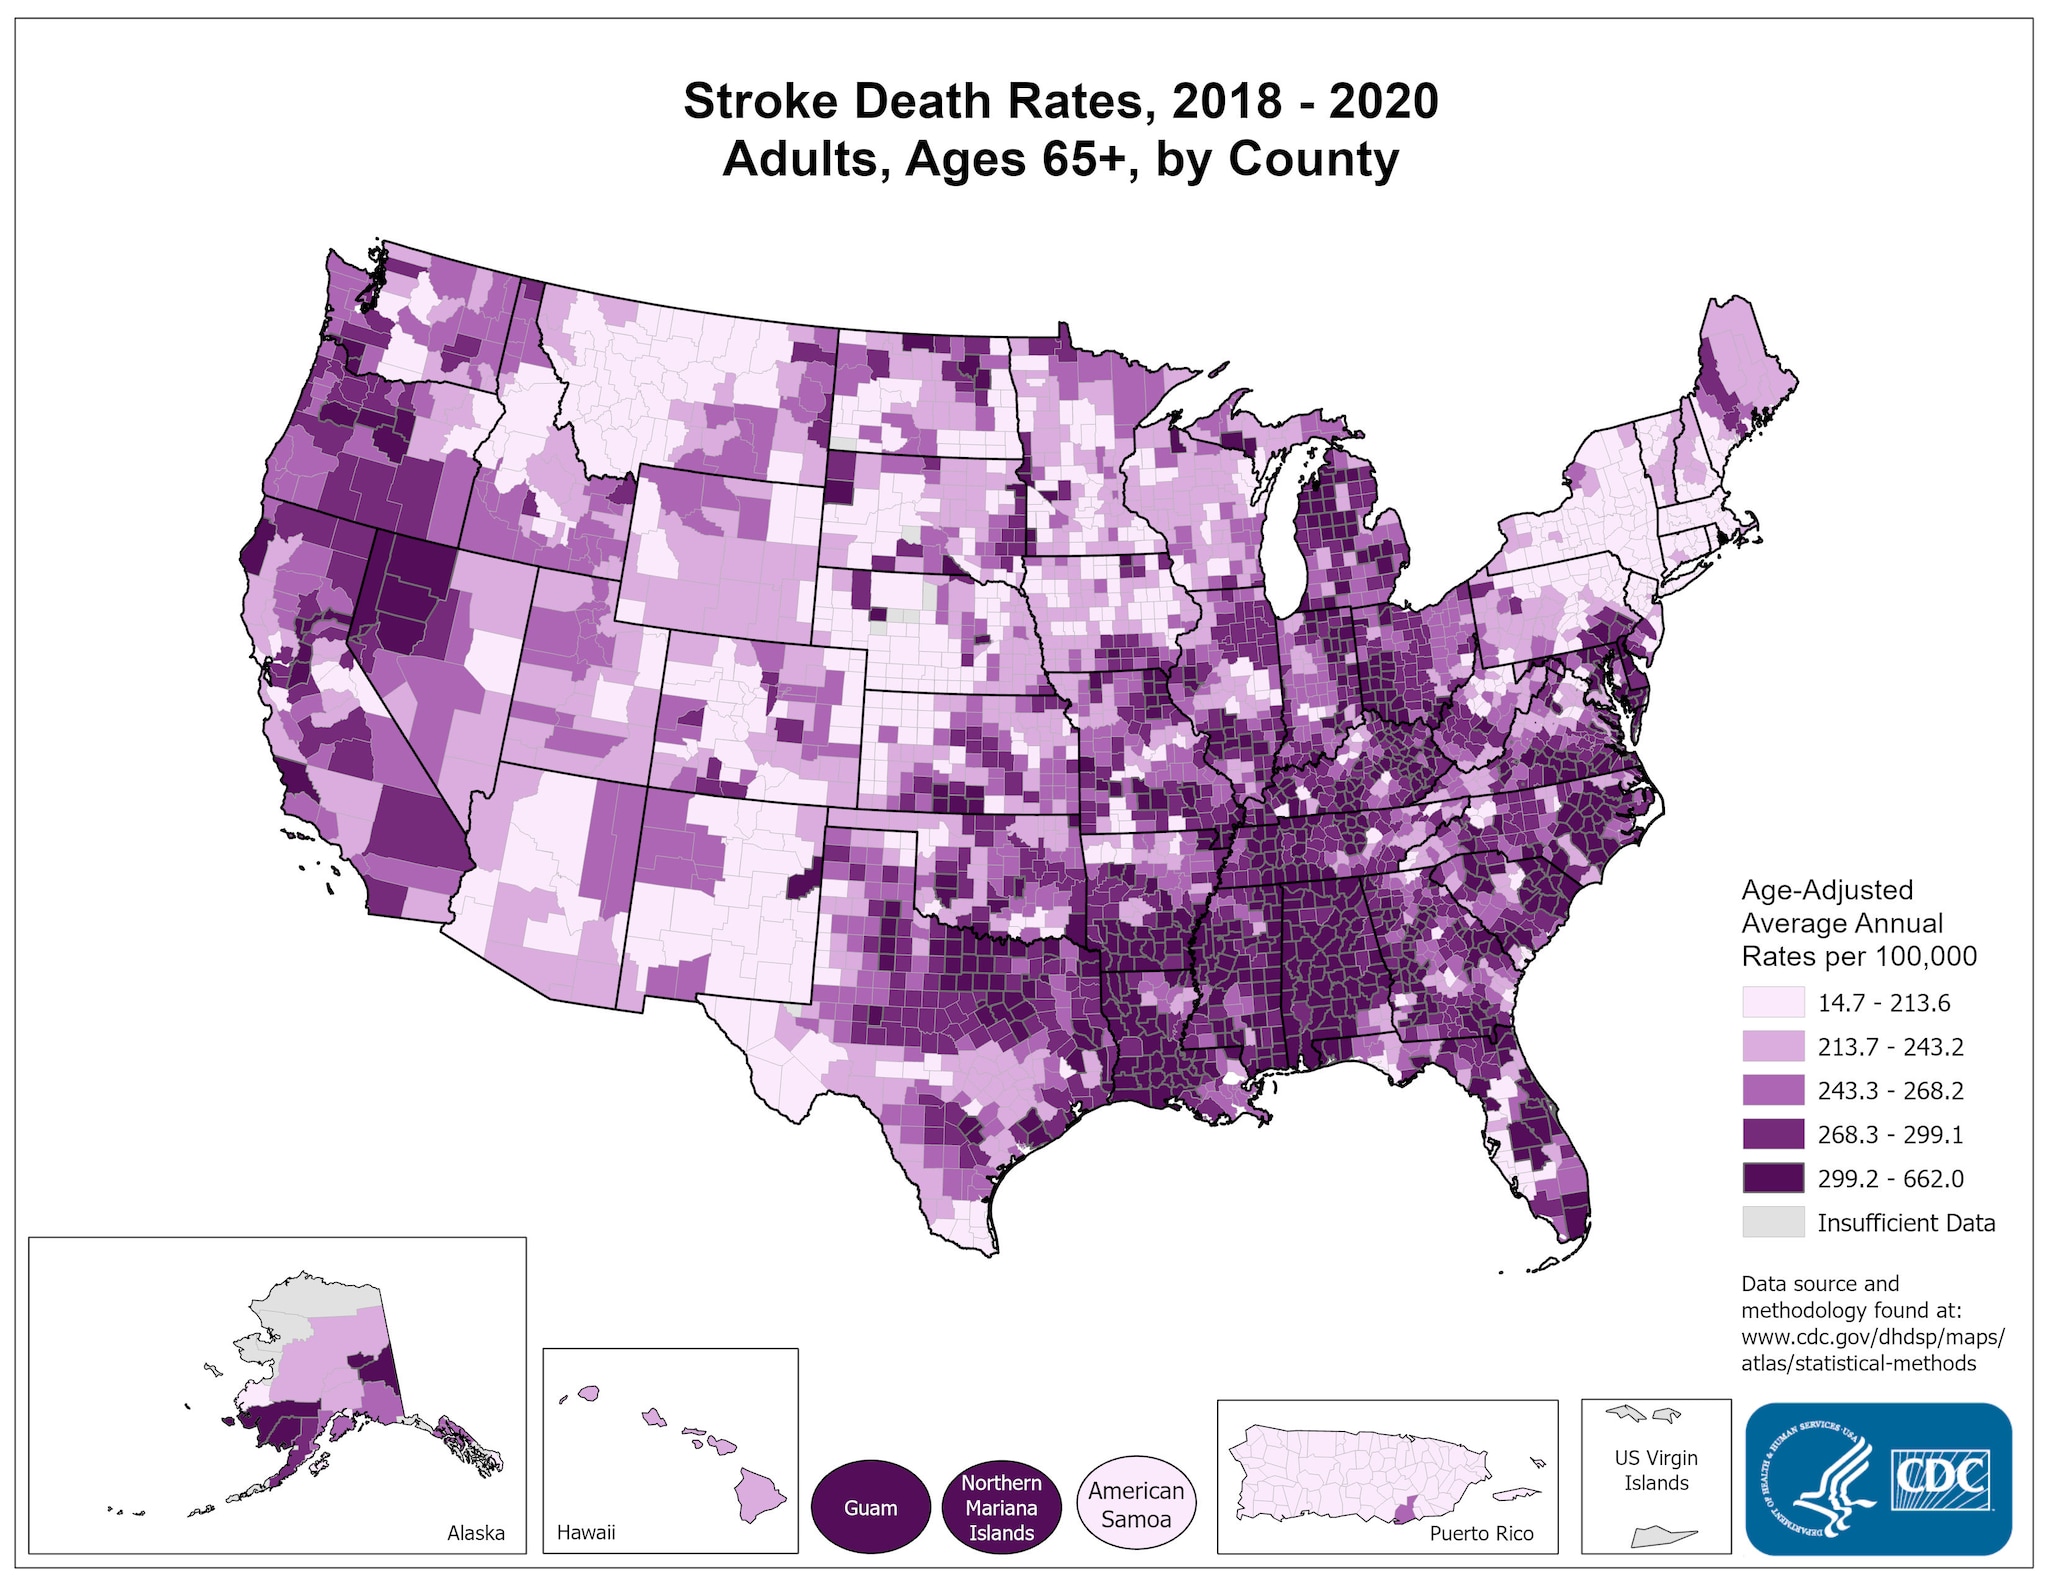 Stroke Death Rates for 2018 through 2020 for Adults Aged 65 Years and Older by County